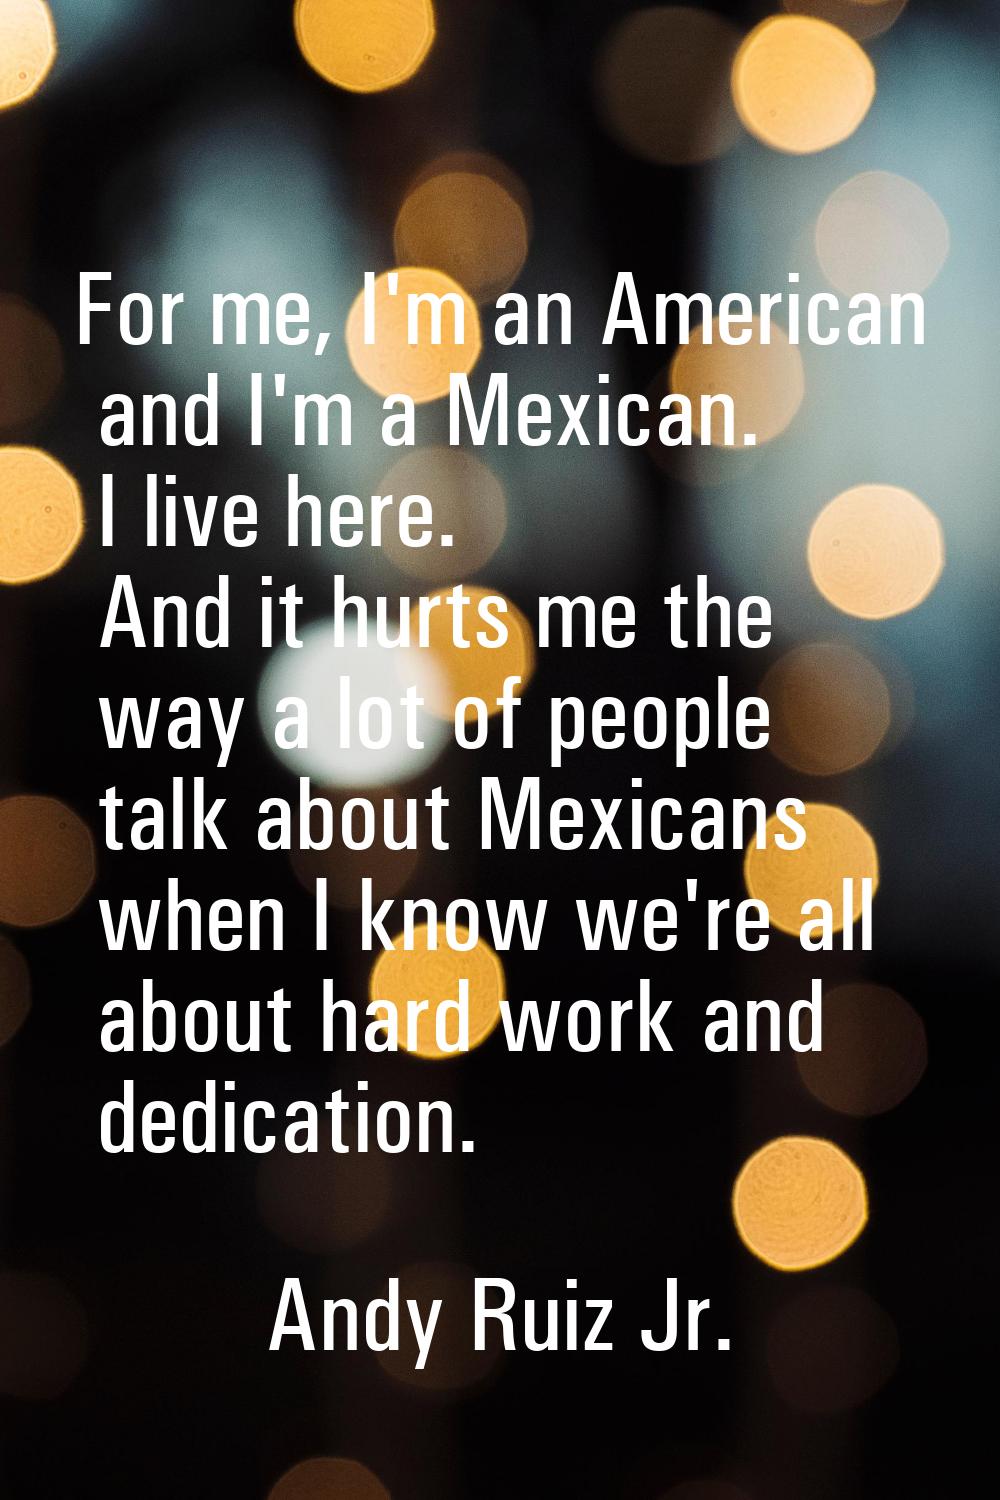 For me, I'm an American and I'm a Mexican. I live here. And it hurts me the way a lot of people tal